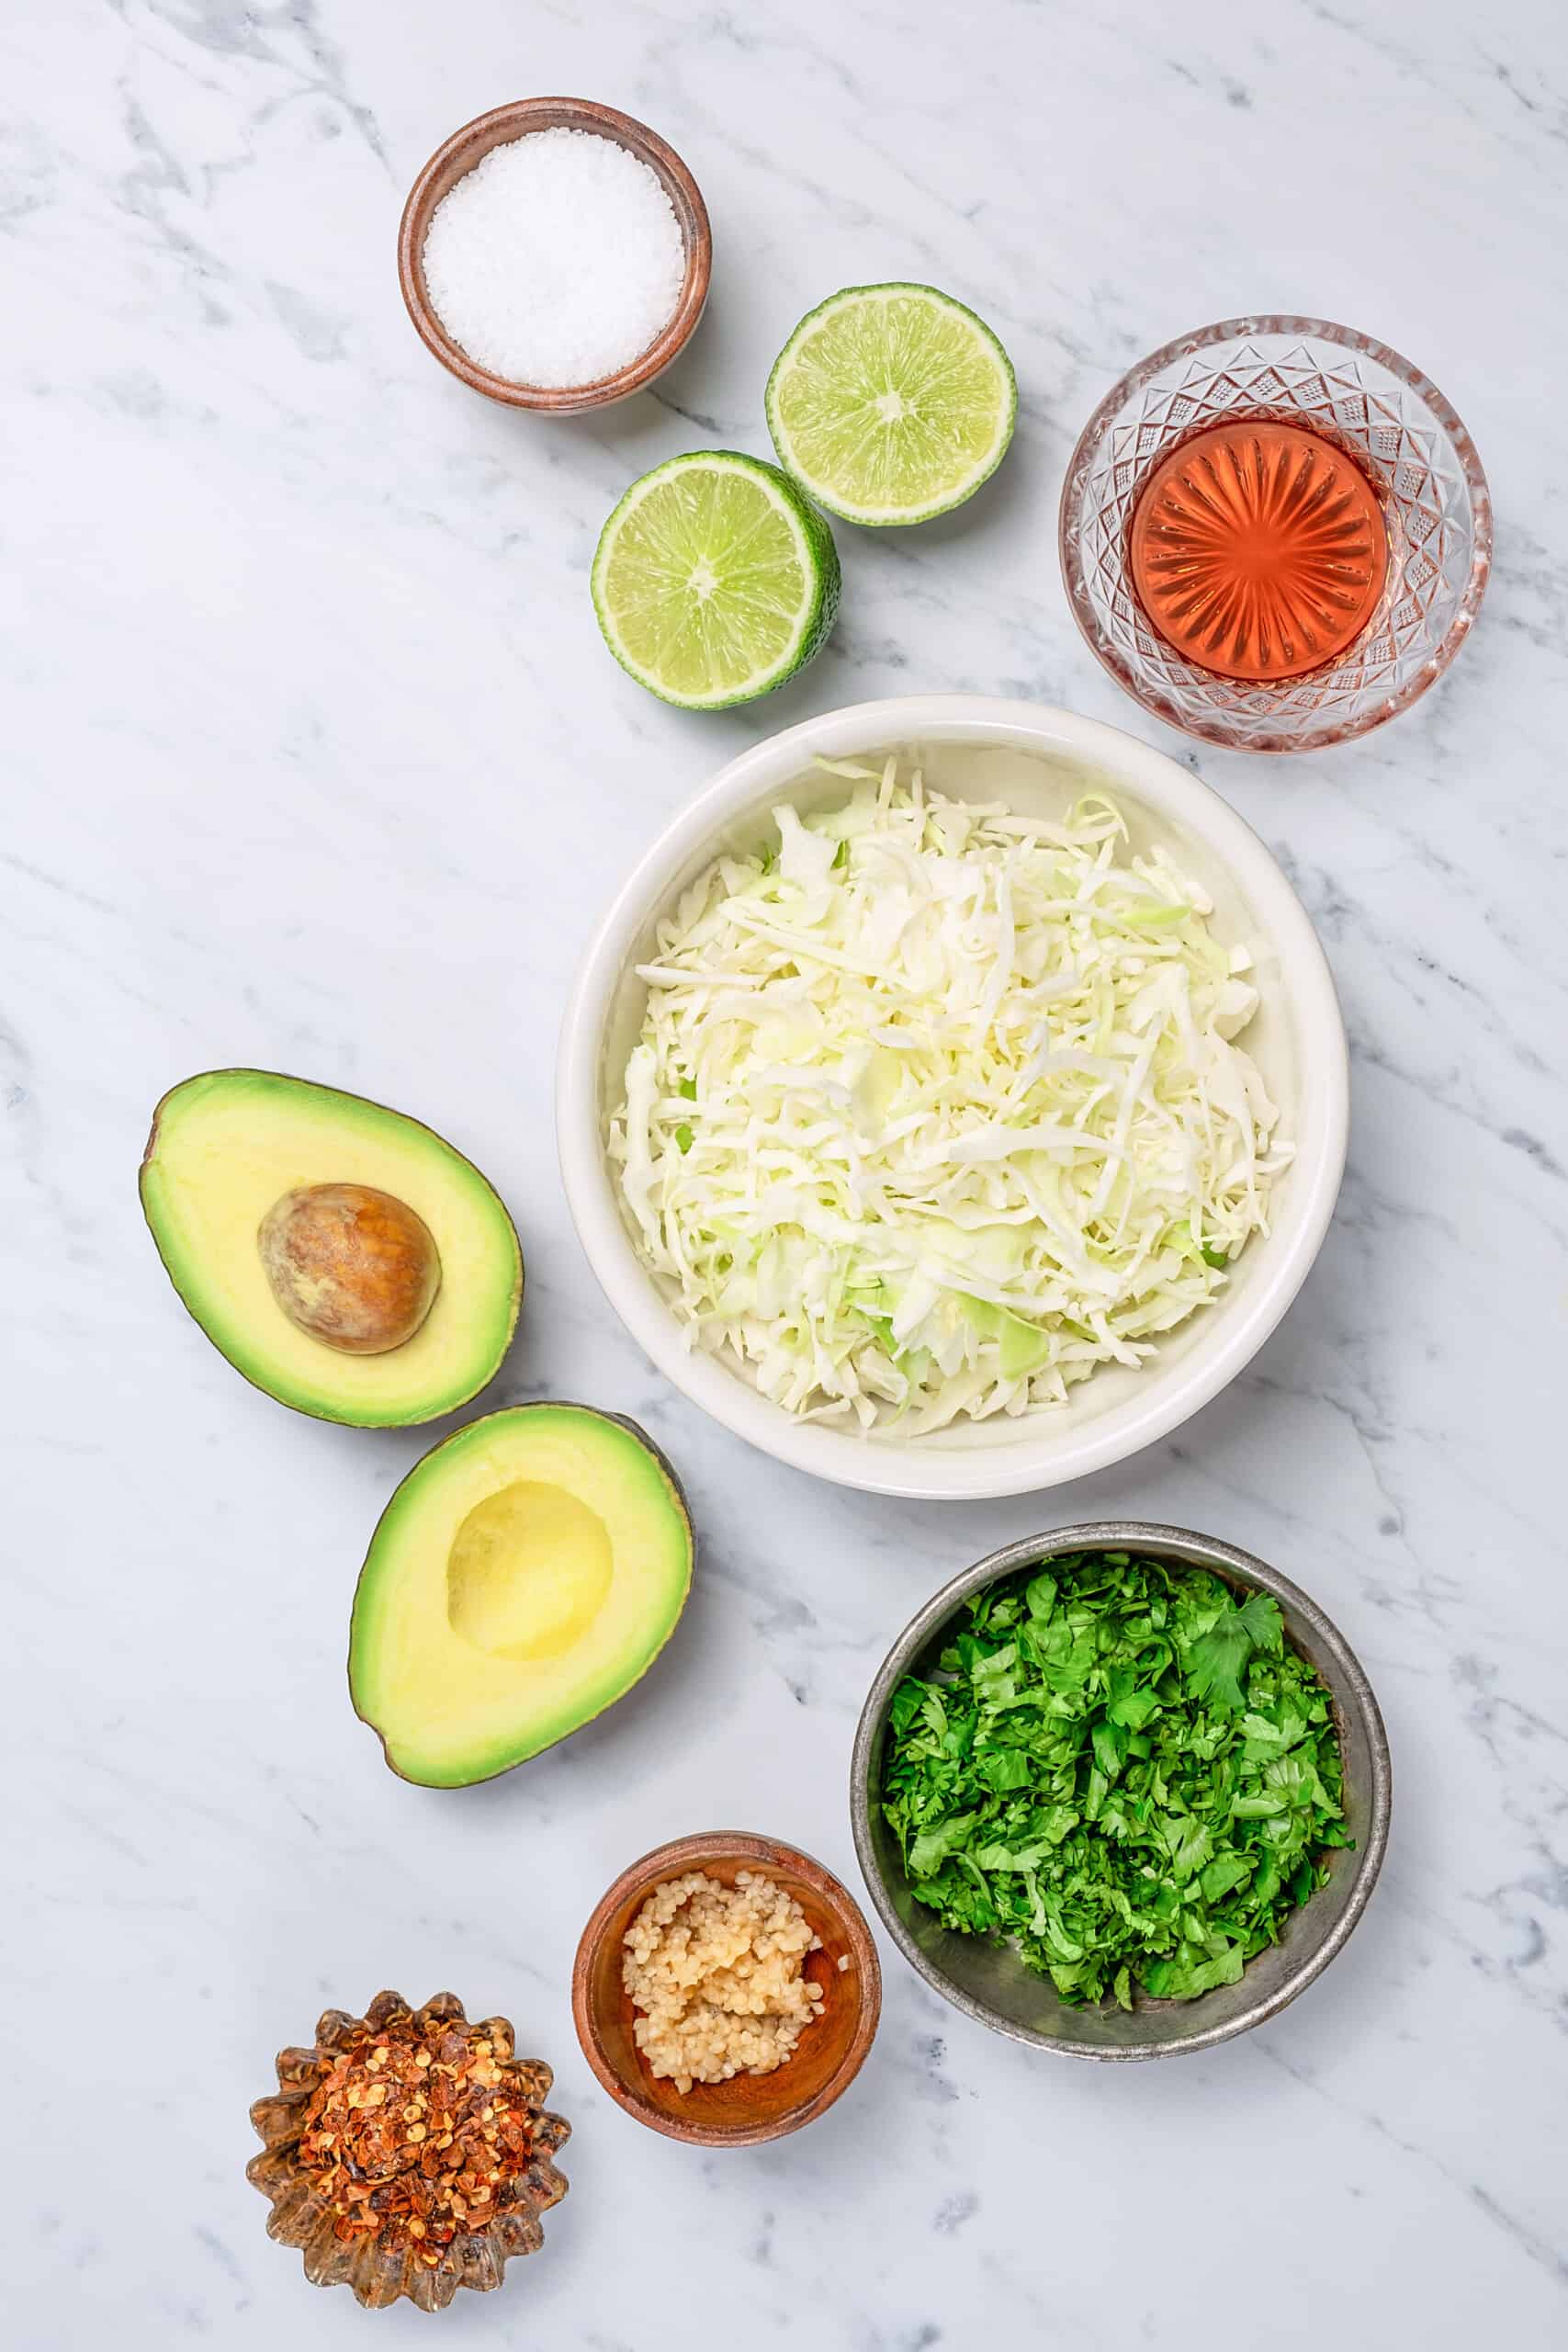 ingredients to make a creamy slaw like cabbage, avocados, herbs, and lime juice